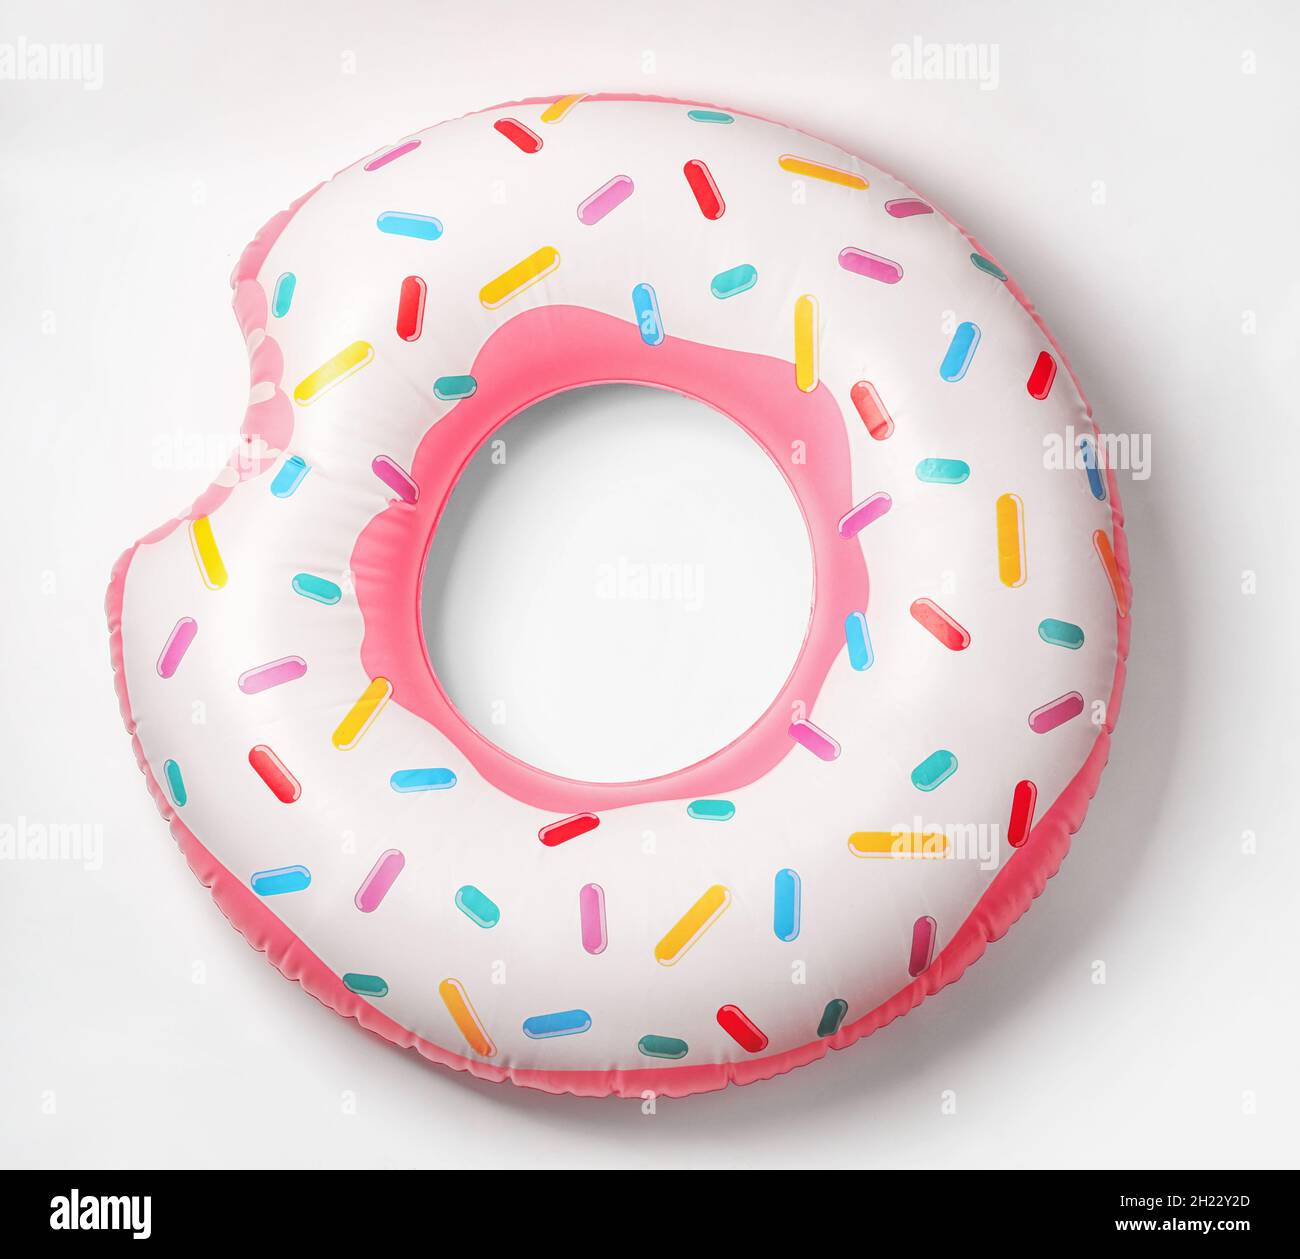 Bright inflatable donut on white background. Beach object Stock Photo